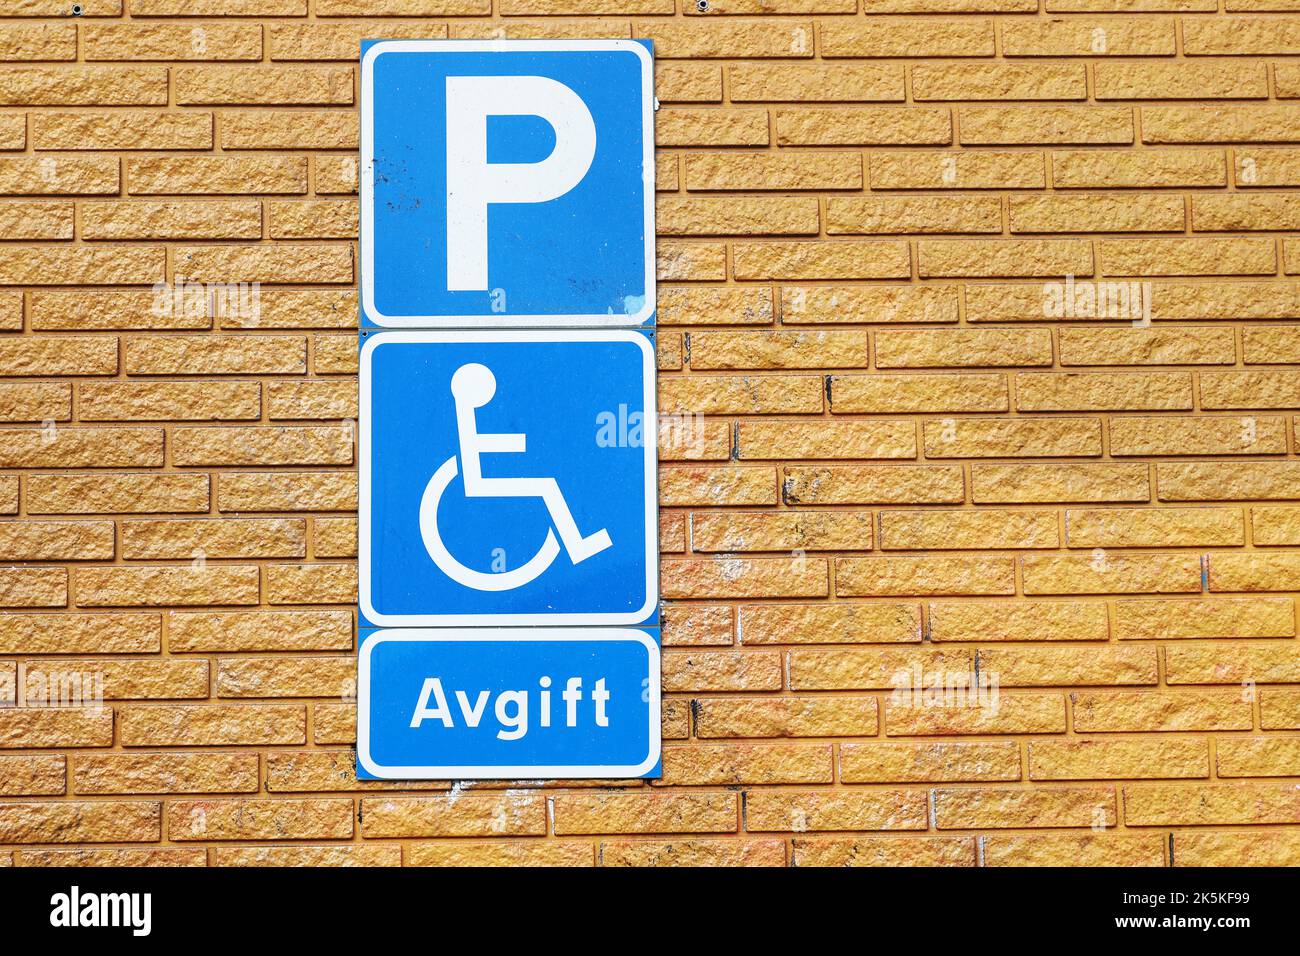 Swedish road signs indicate that parking is permitted for a fee if vehicle has a handicap permit. Stock Photo